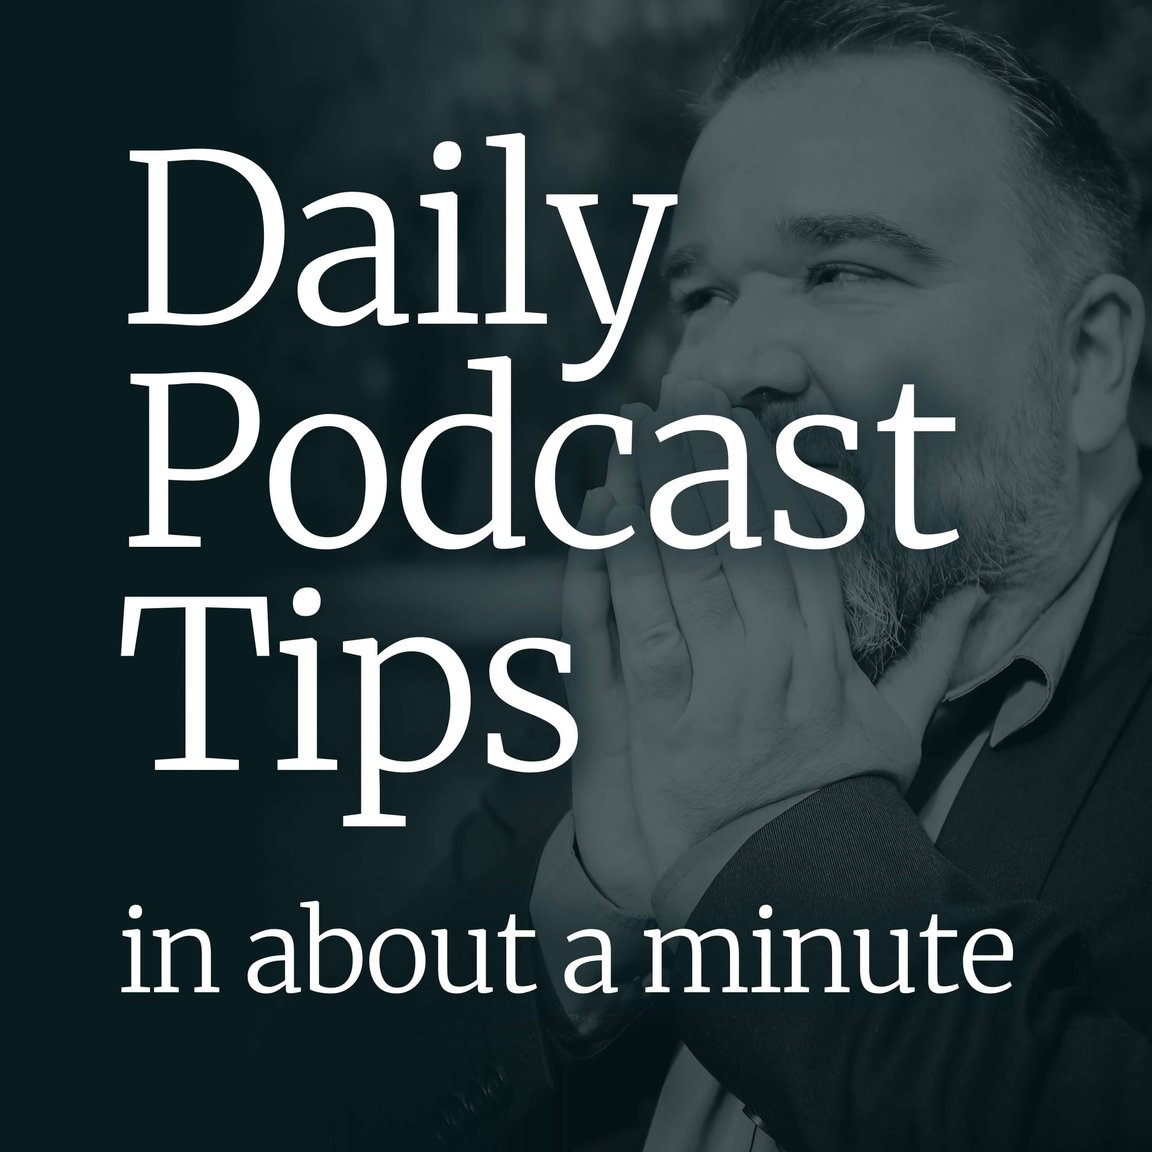 Daily Podcast Tips... in about a minute thumbnail